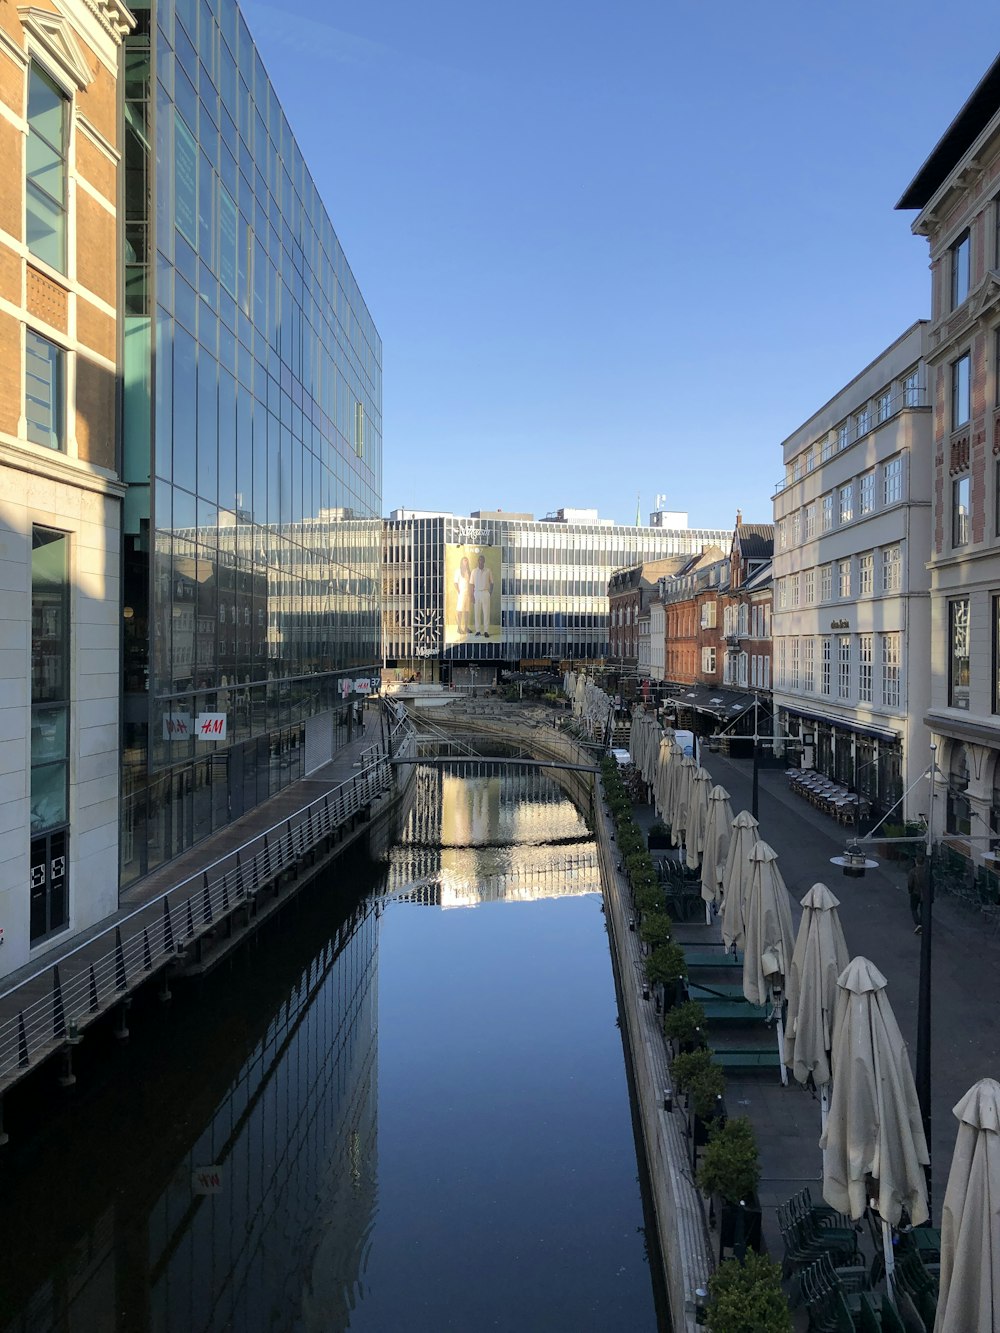 a canal between buildings